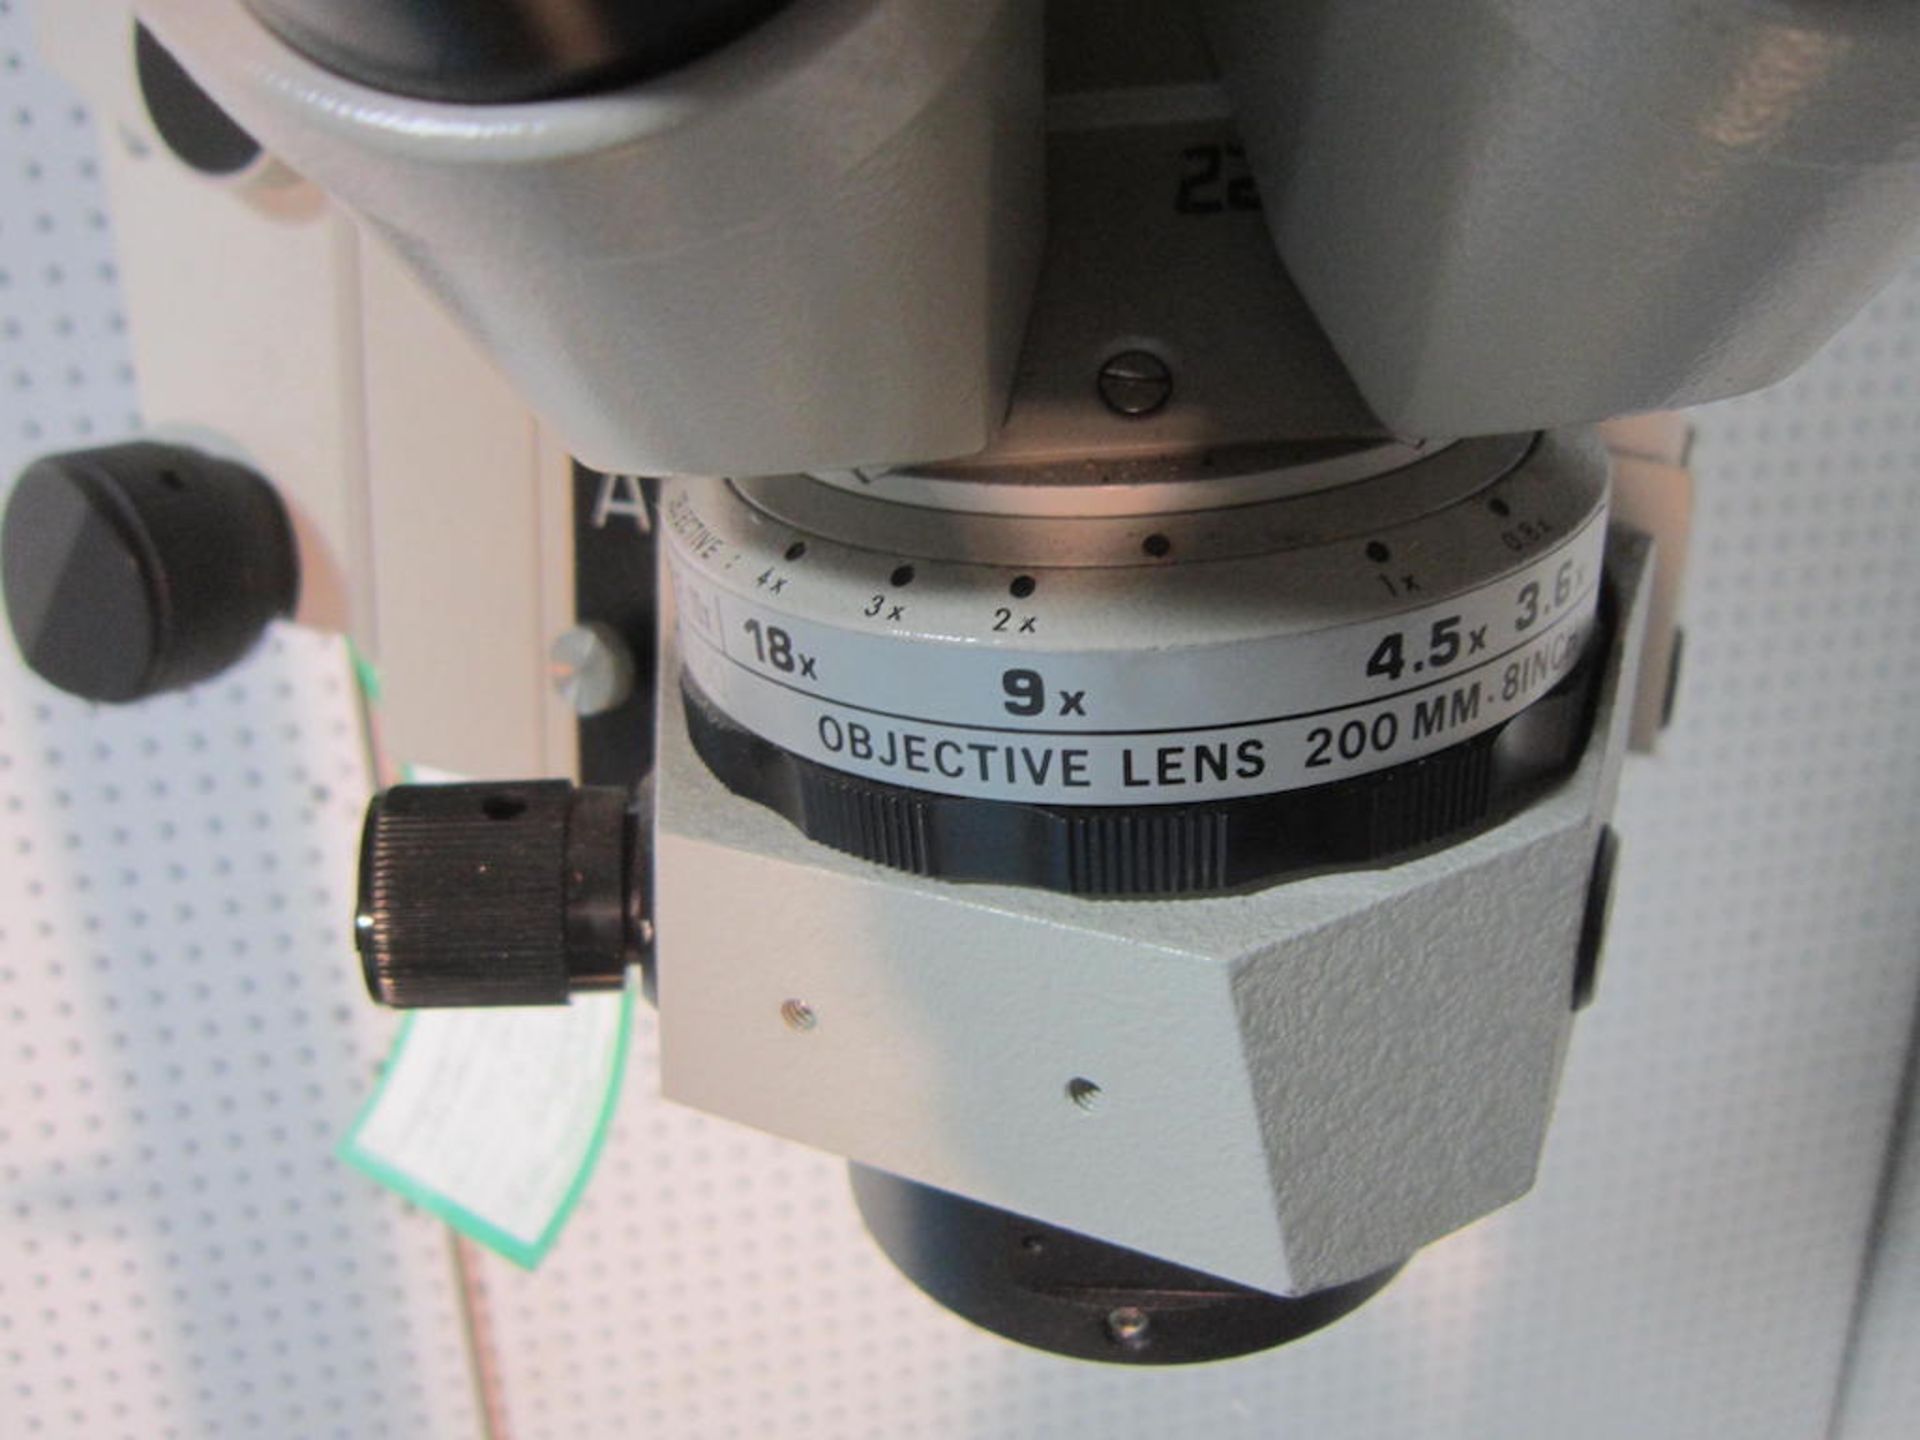 Weck Surgical Systems Microscope 1402 B12 with Light, Object Lens 200mm with Foot Switch - Image 6 of 16